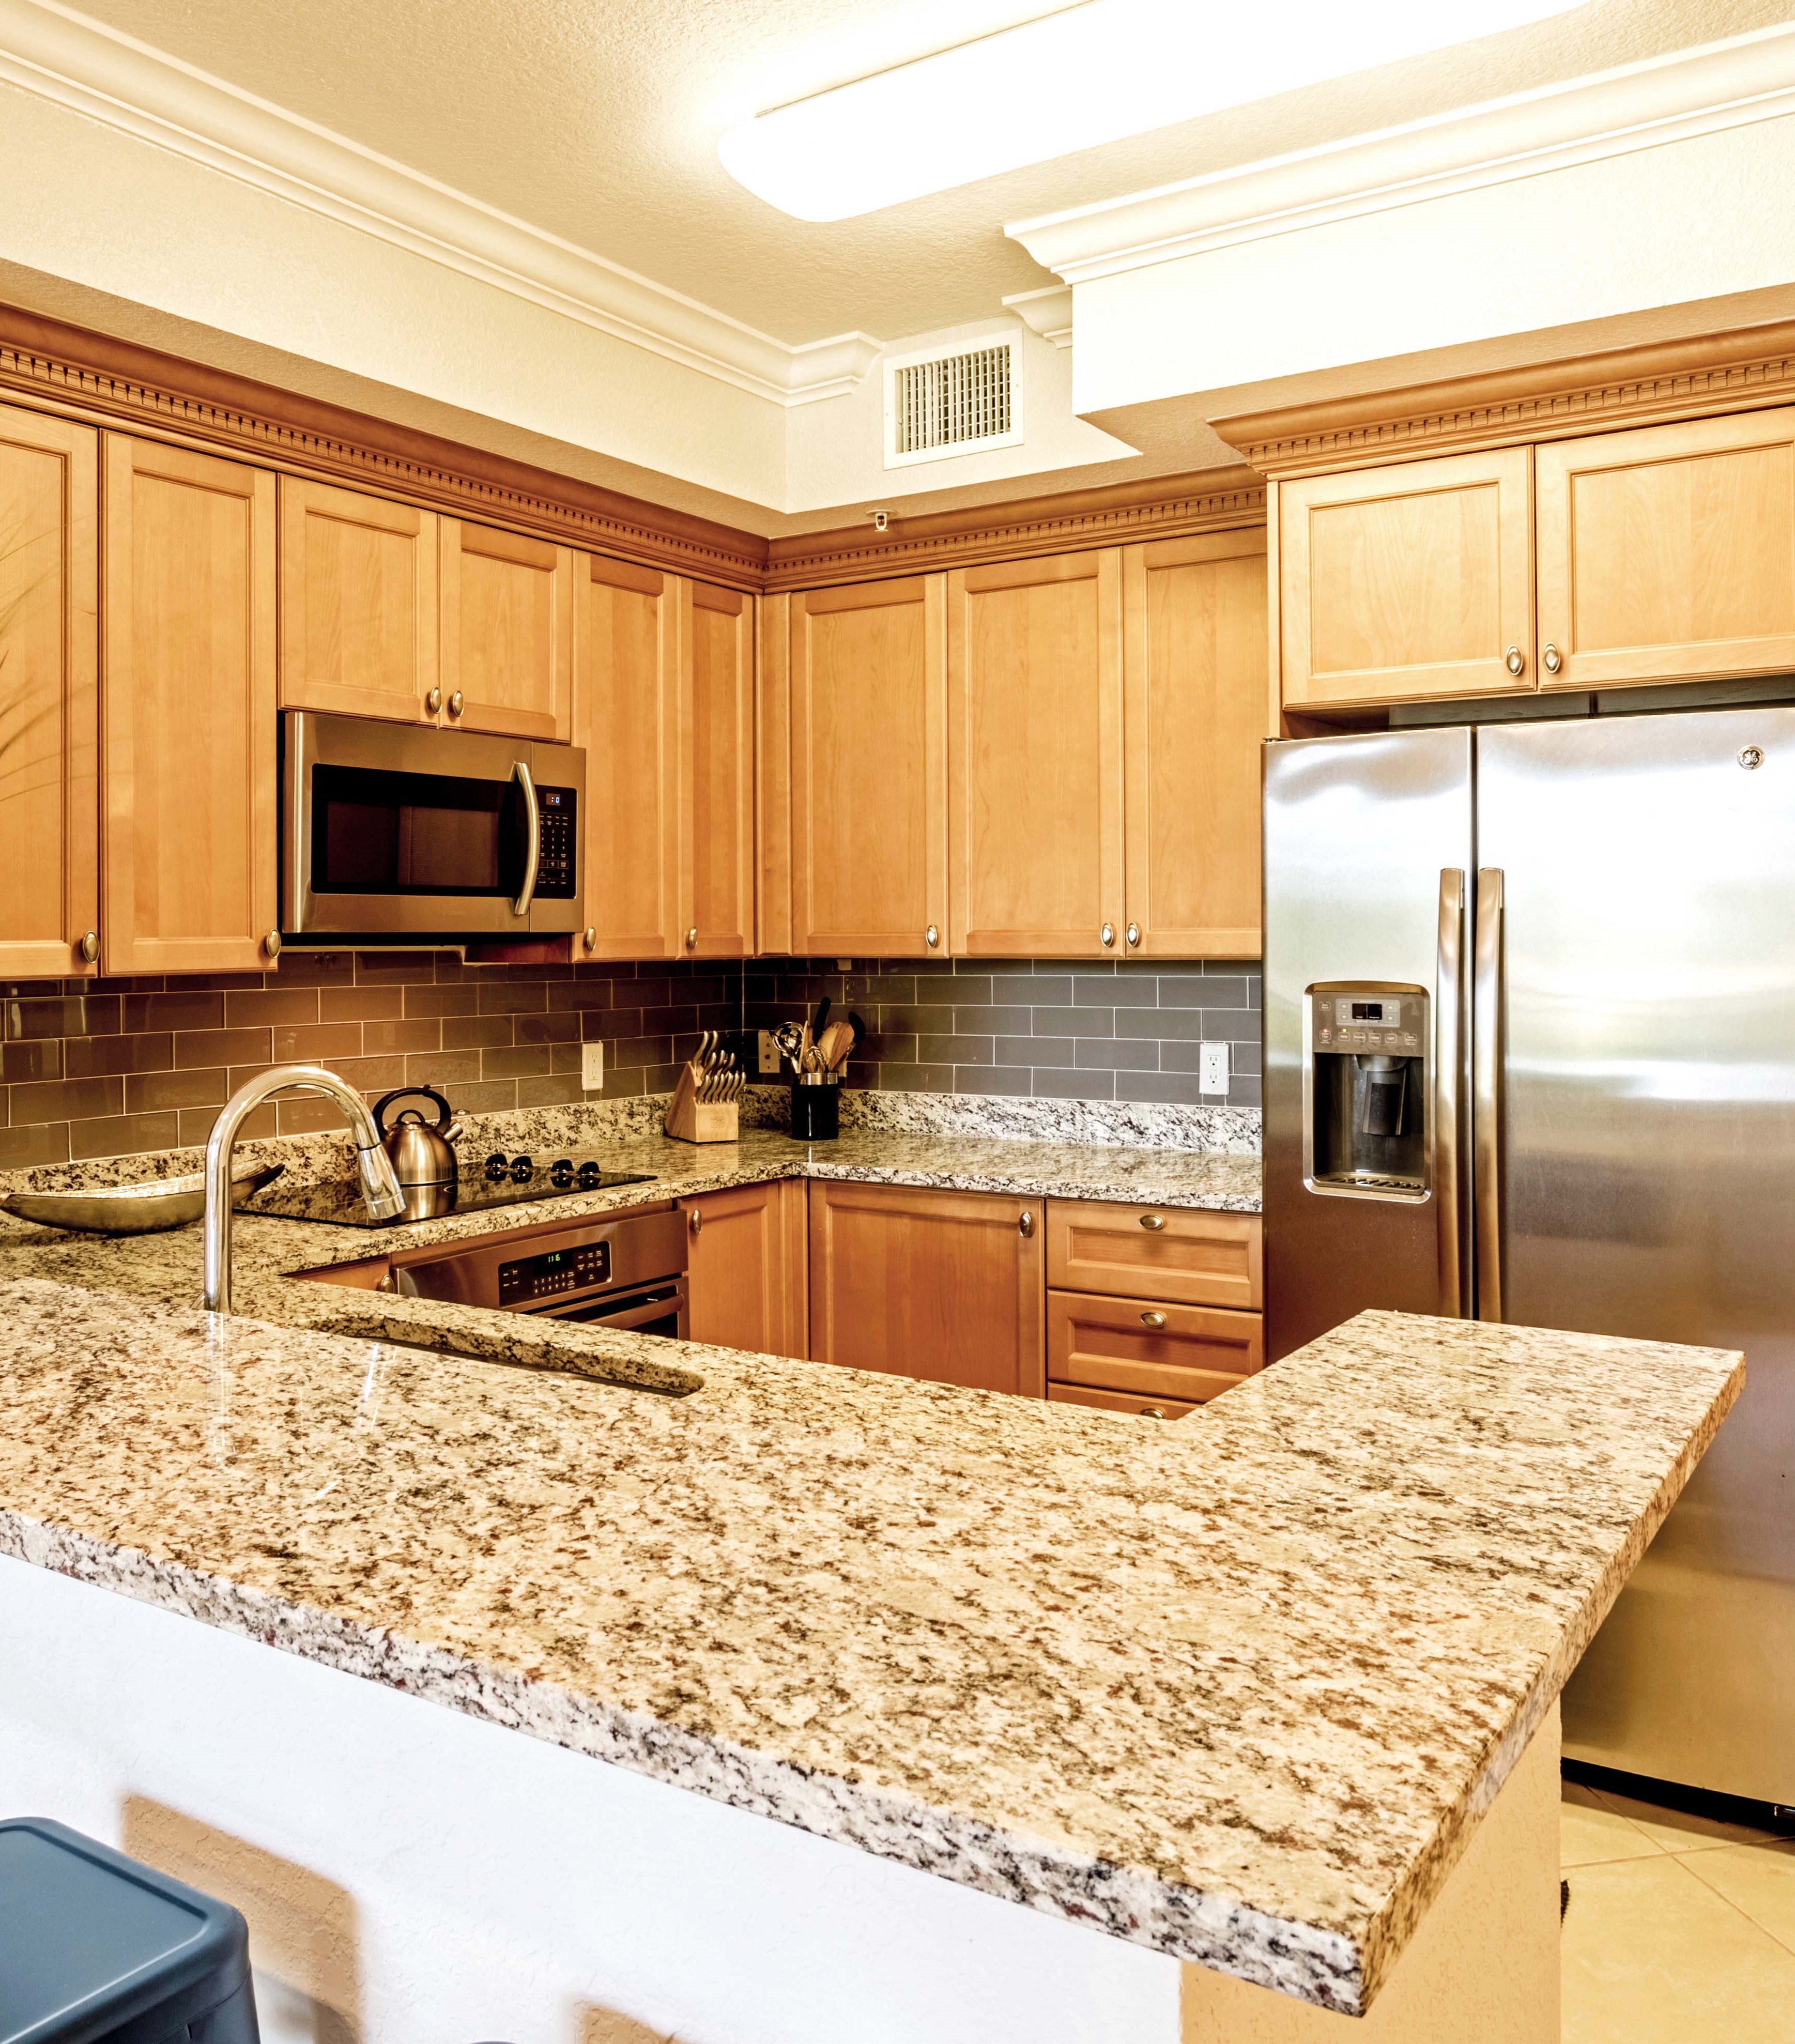 Vizcaya Lakes apartments chef style kitchens with stainless steel appliances and granite countertops.